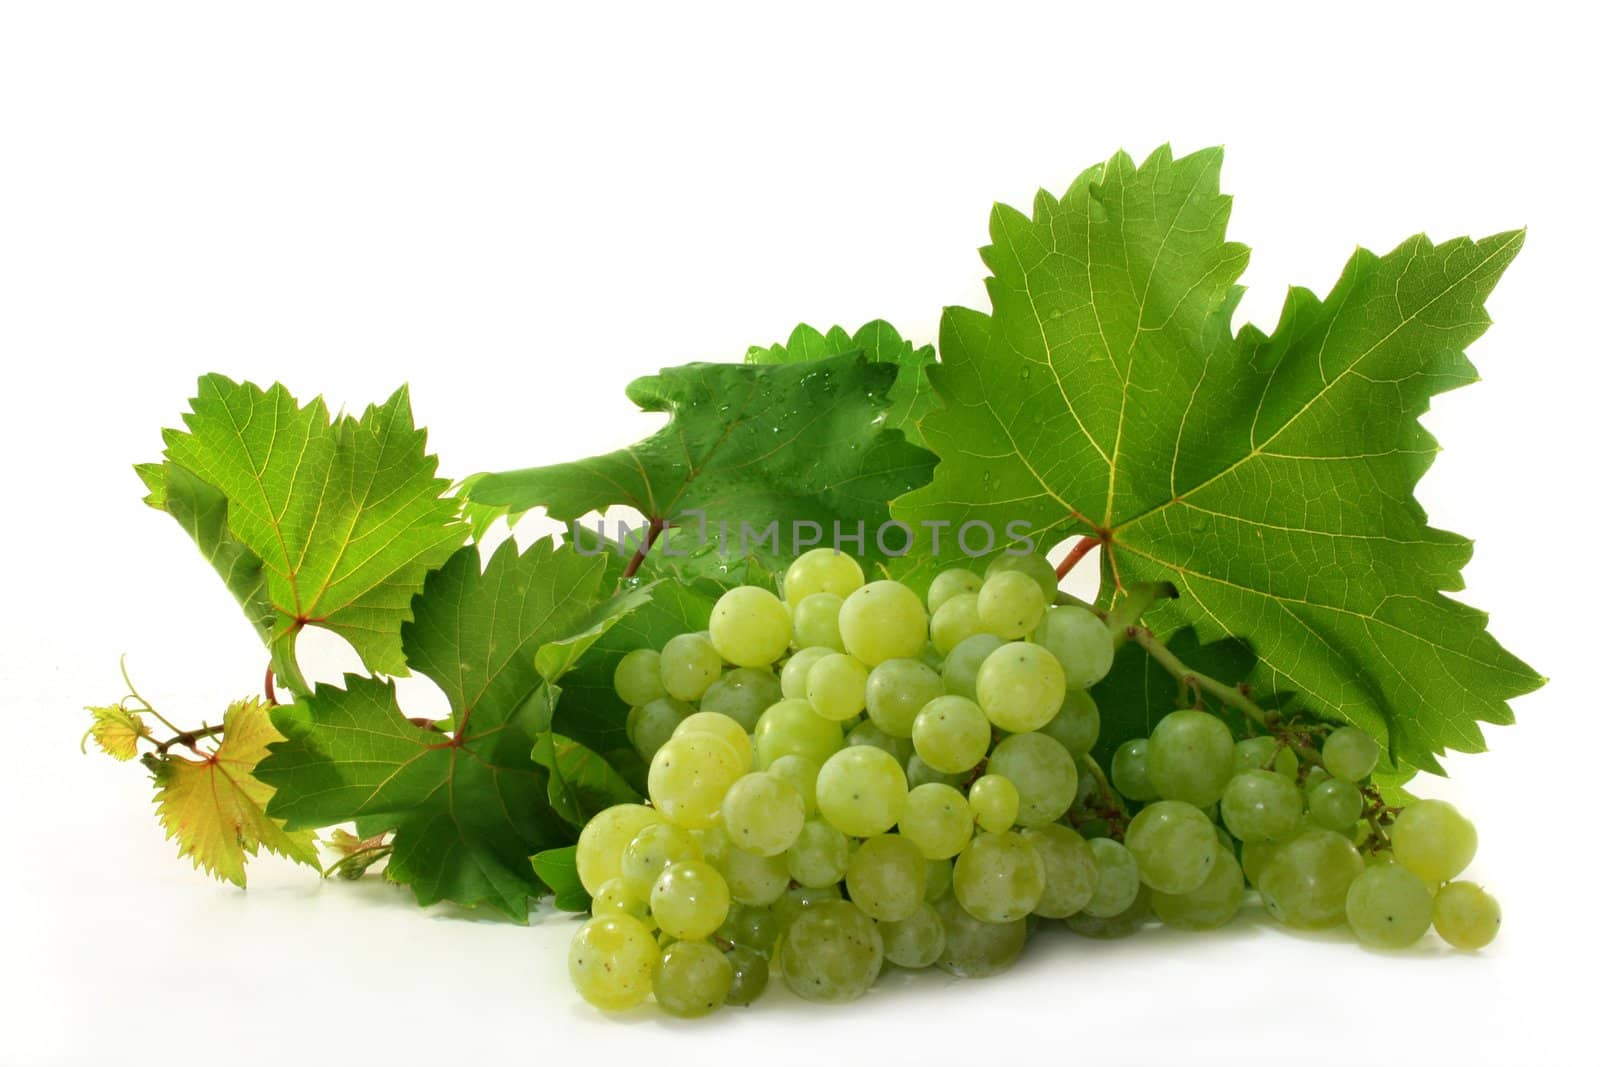 Grapes and vine leaves on a white background